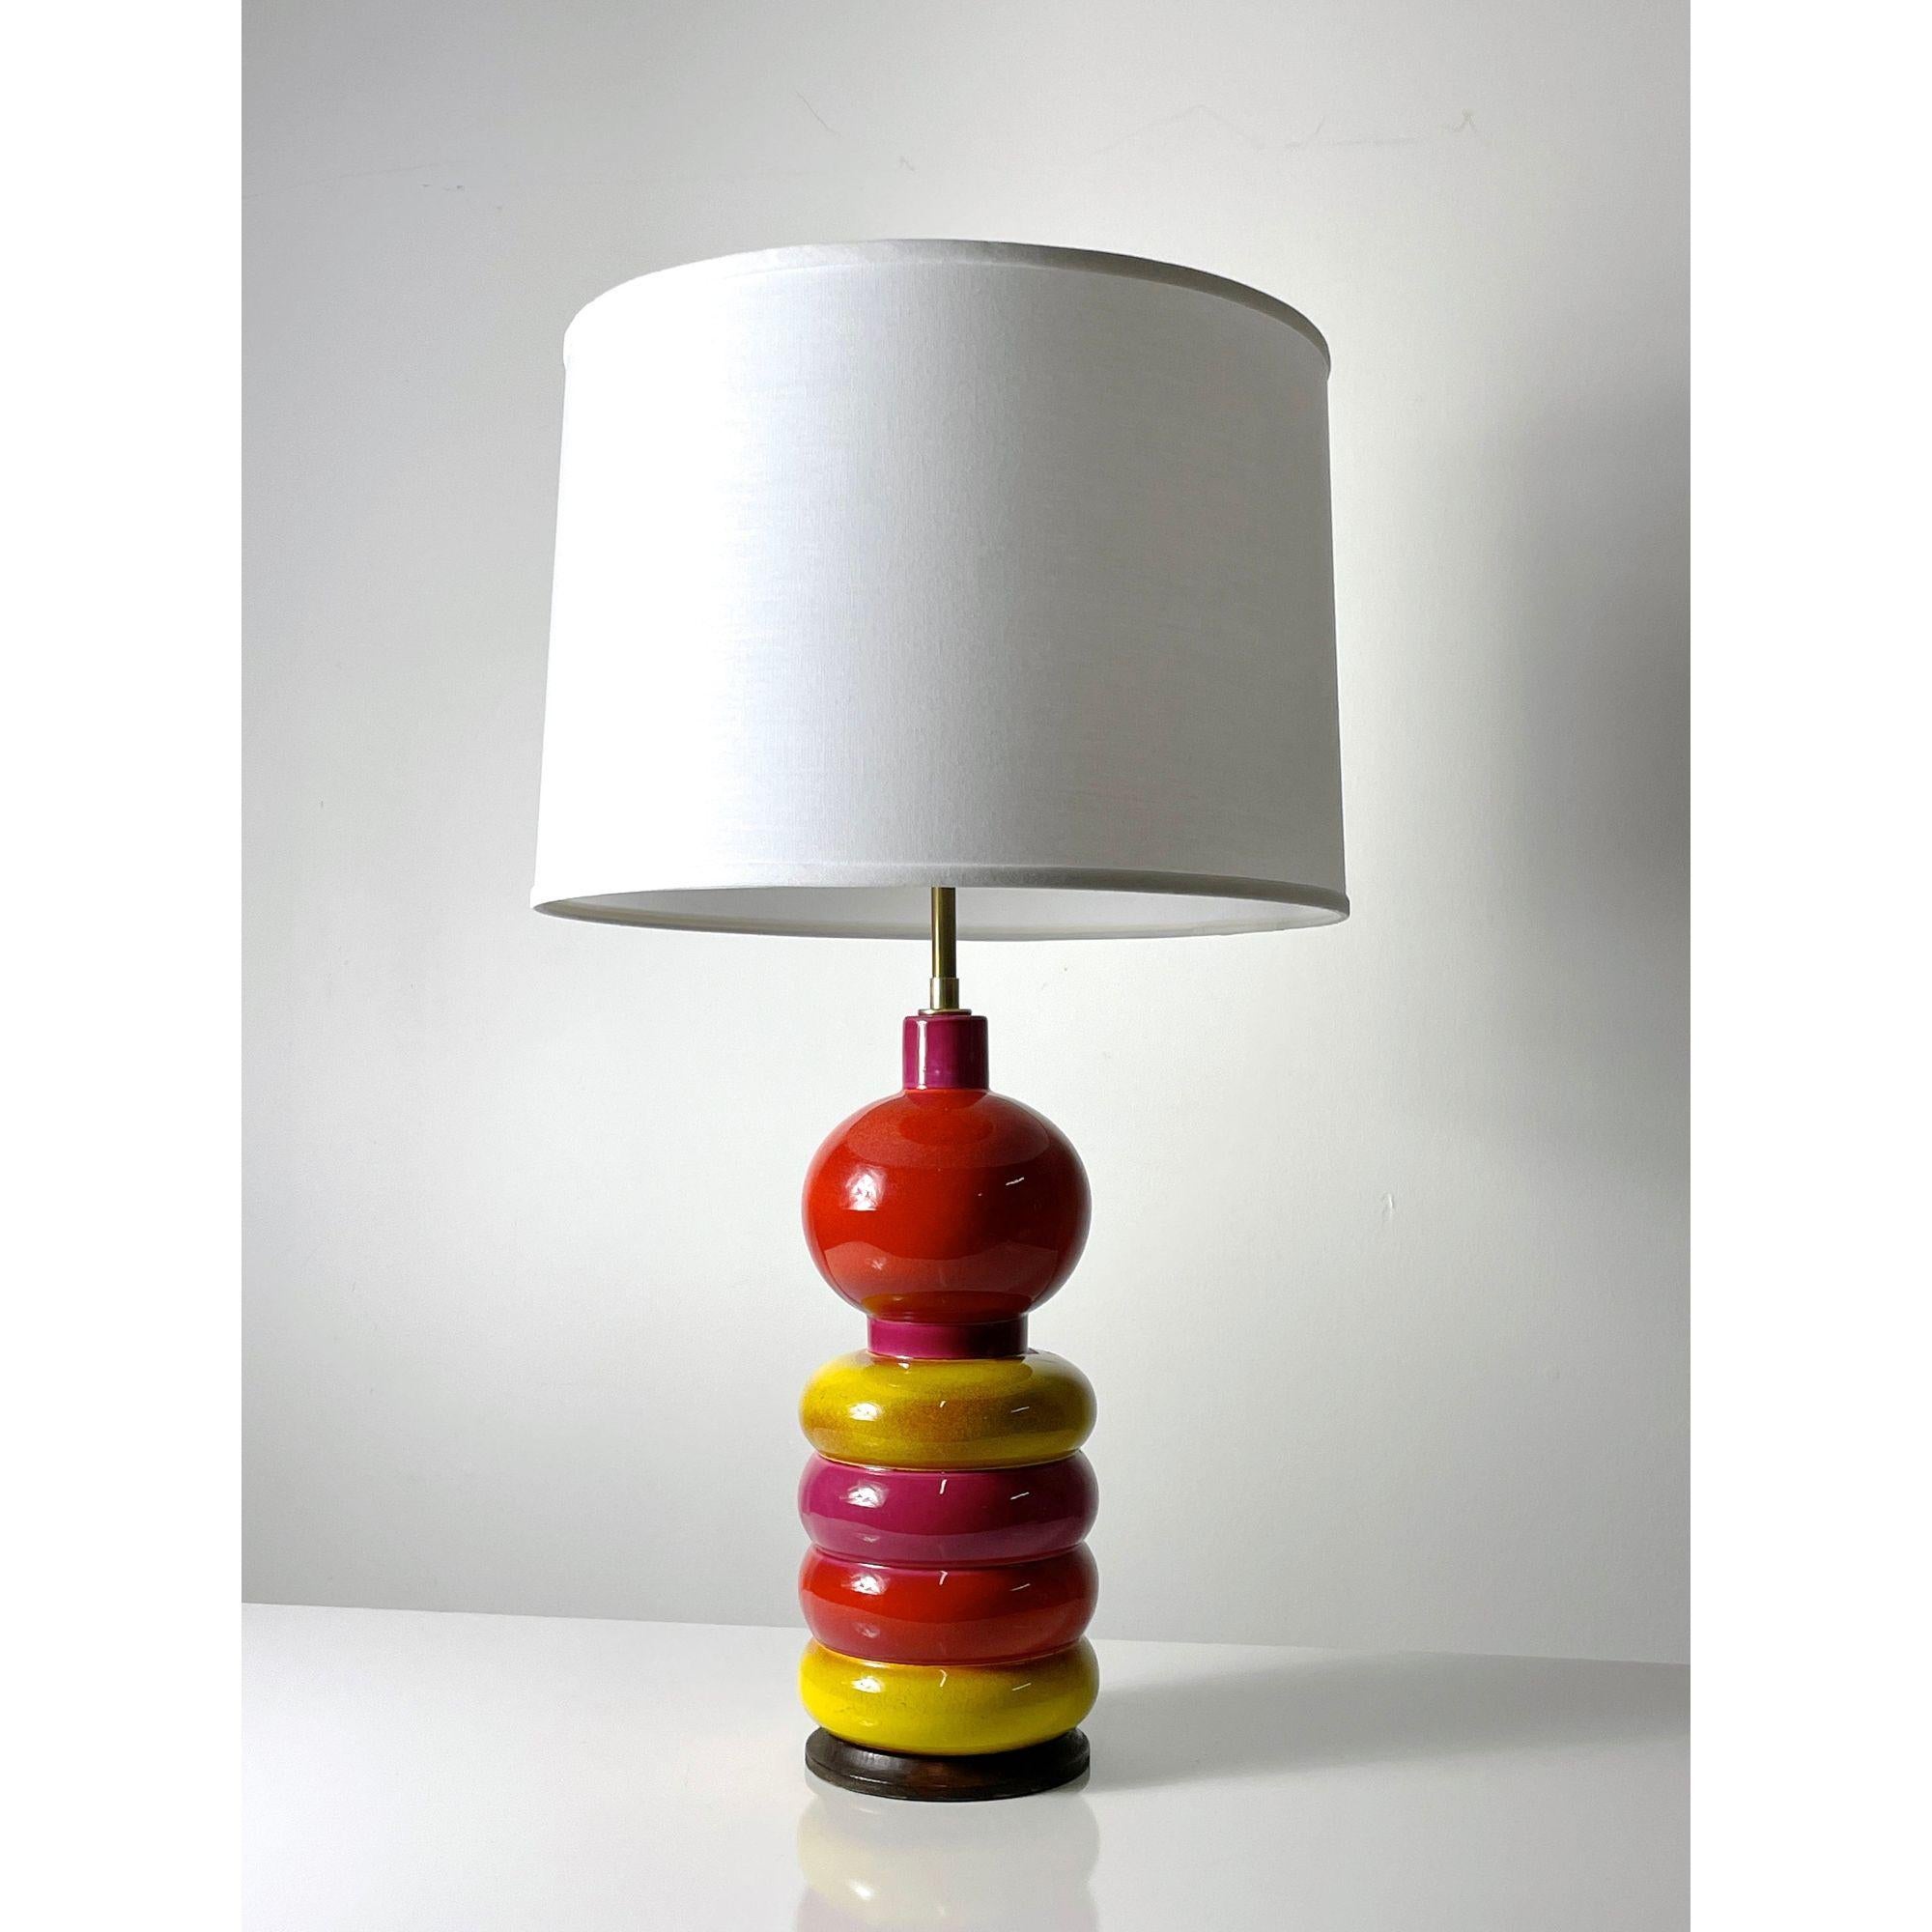 Mid Century Modern Multi Color Italian Ceramic Lamp 

Colorful ceramic table lamp Made in Italy circa 1960s
Bright alternating glaze colors on wood base
Marked 